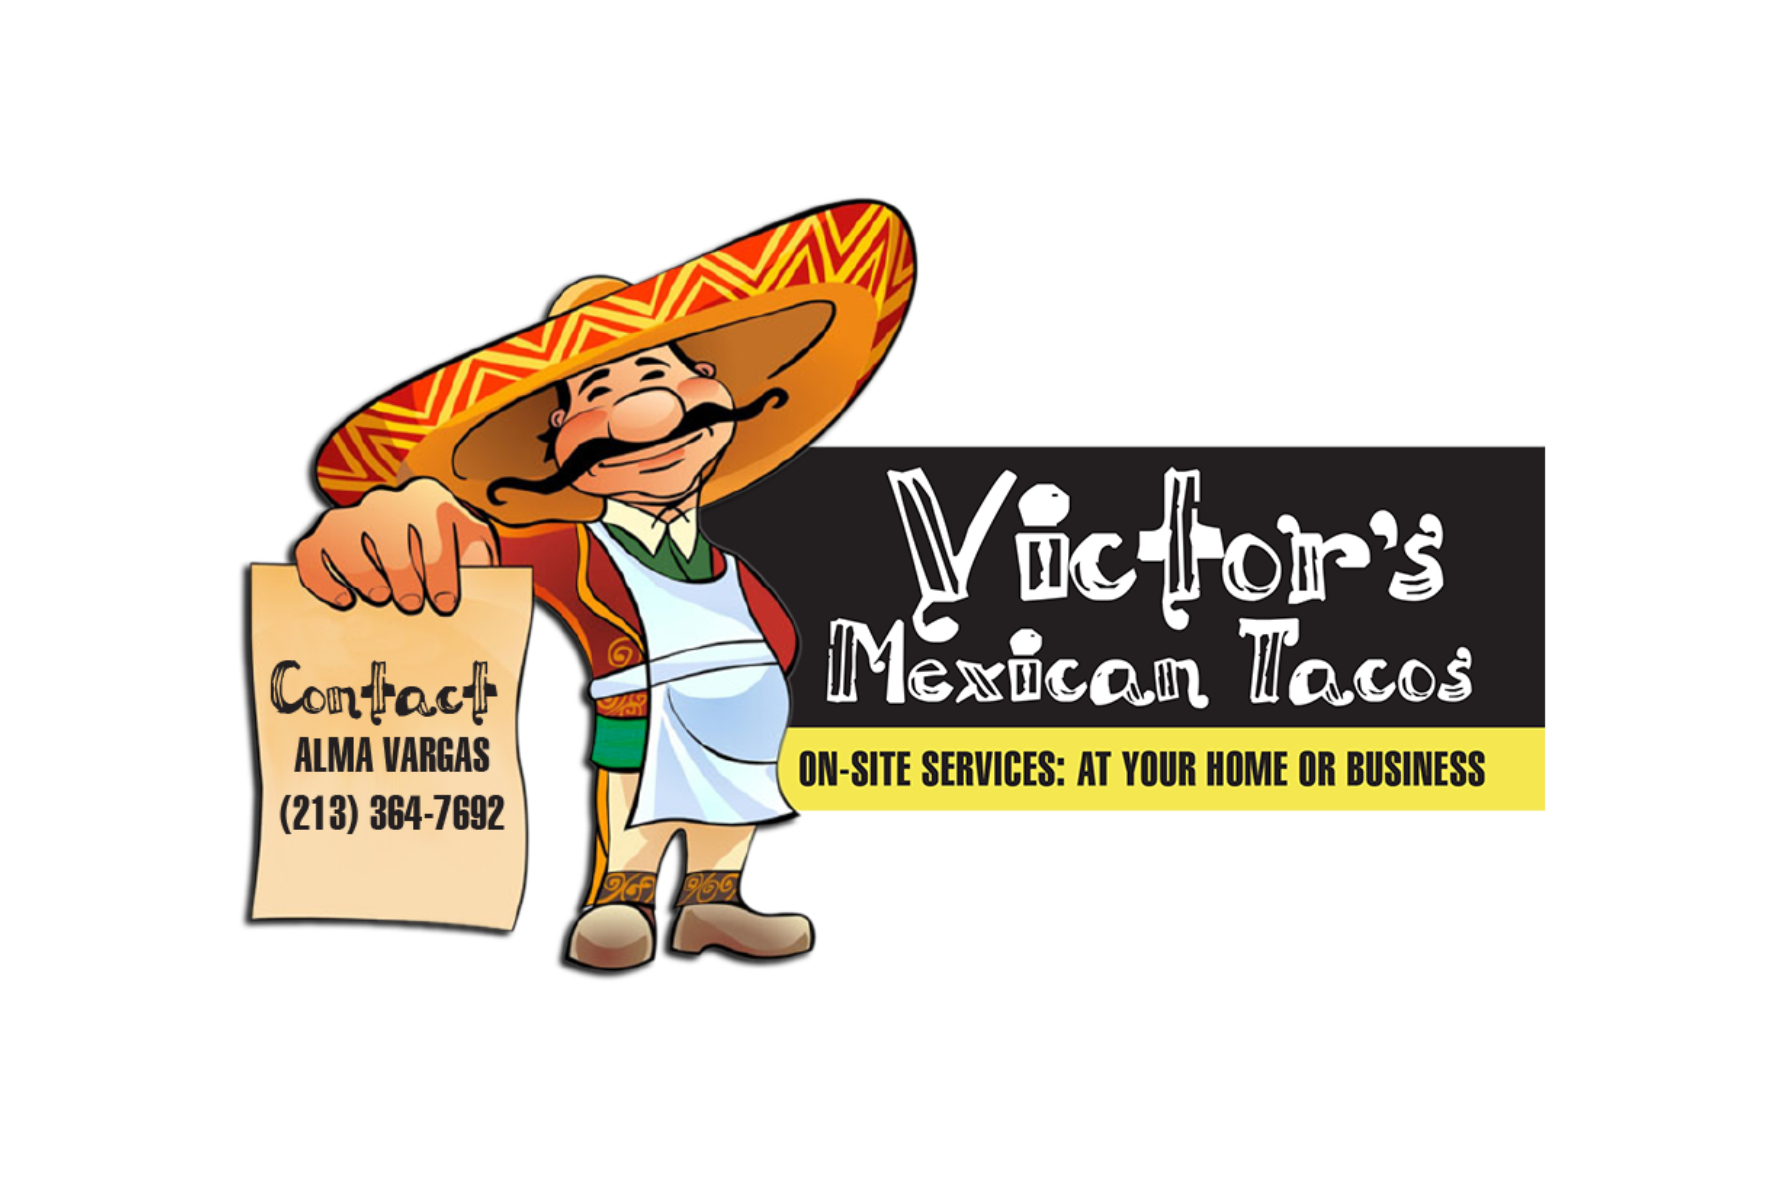 Victor's Tacos